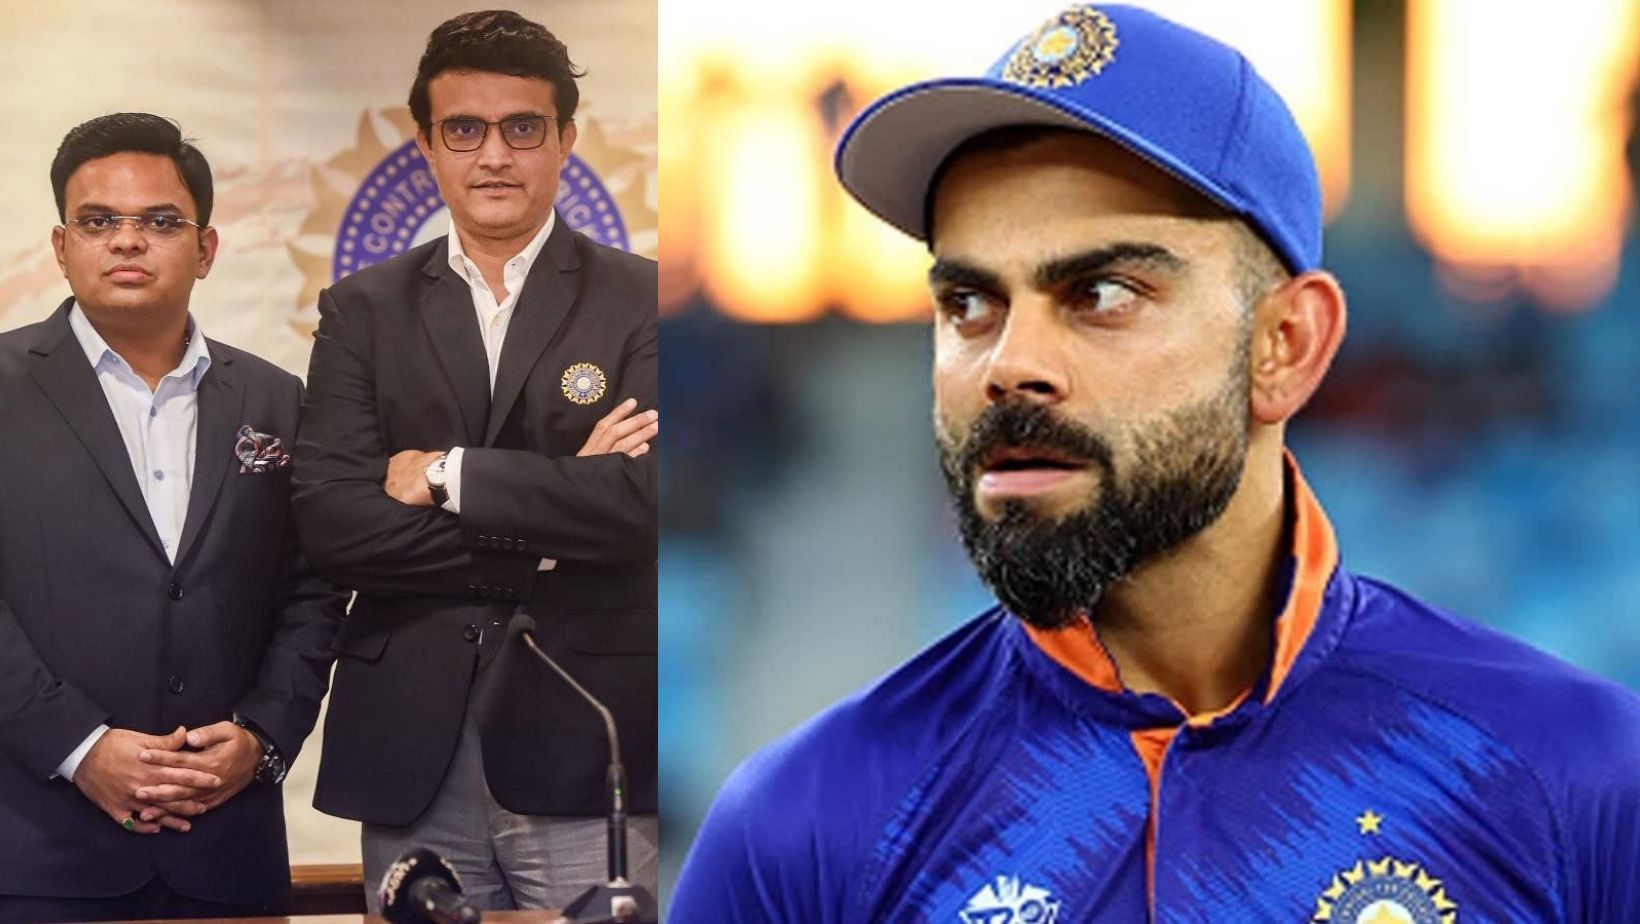 Virat Kohli and the BCCI members have given contradictory statements